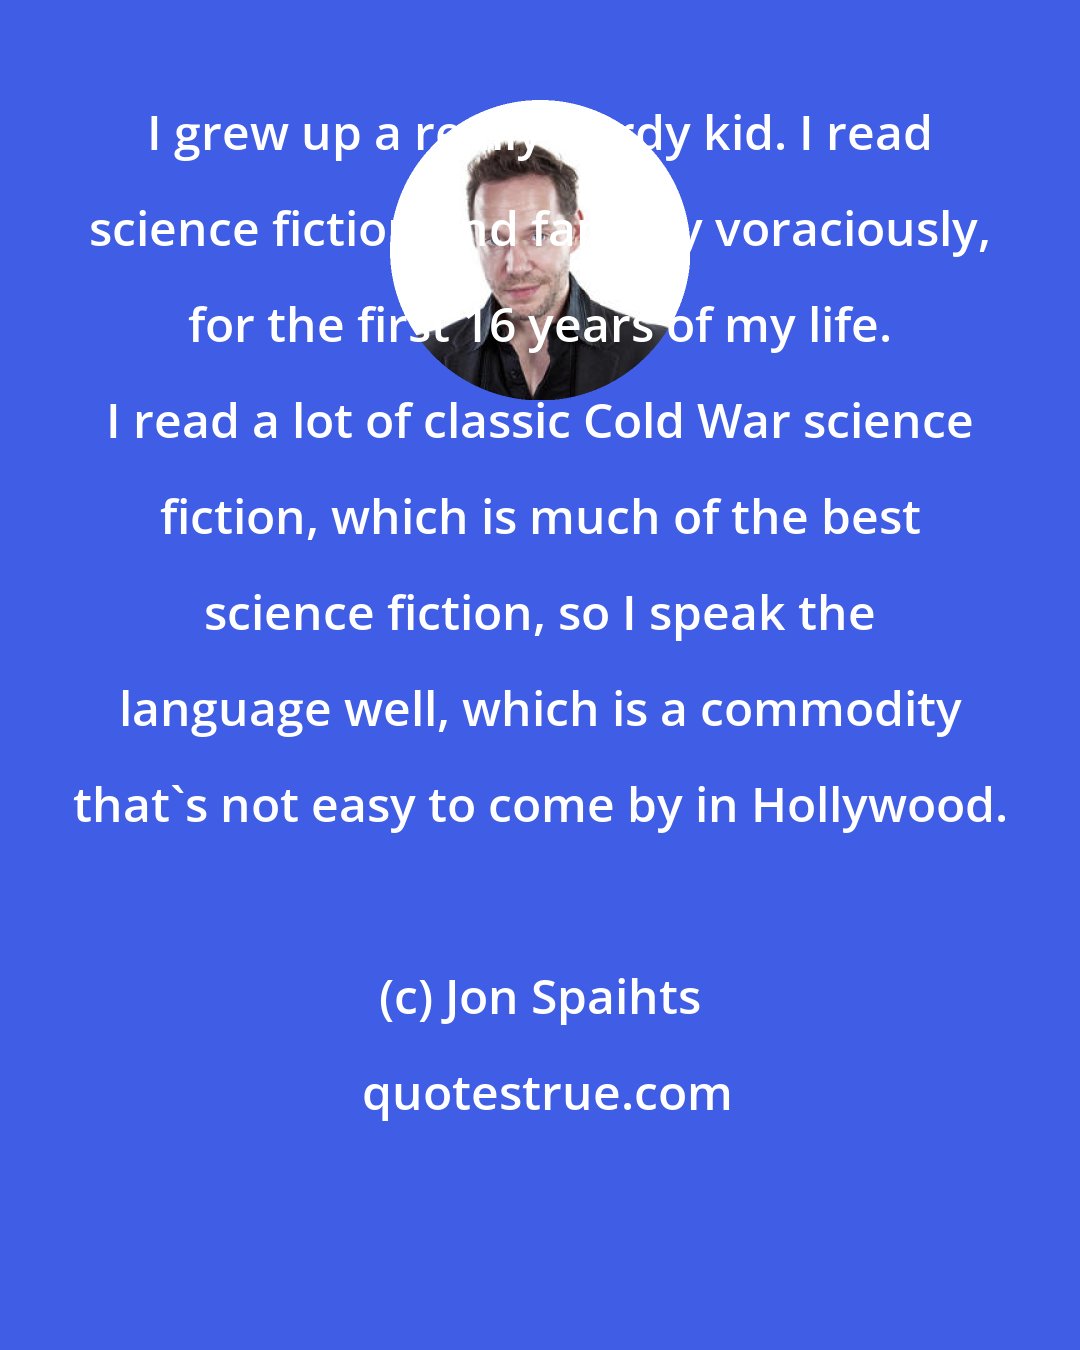 Jon Spaihts: I grew up a really nerdy kid. I read science fiction and fantasy voraciously, for the first 16 years of my life. I read a lot of classic Cold War science fiction, which is much of the best science fiction, so I speak the language well, which is a commodity that's not easy to come by in Hollywood.